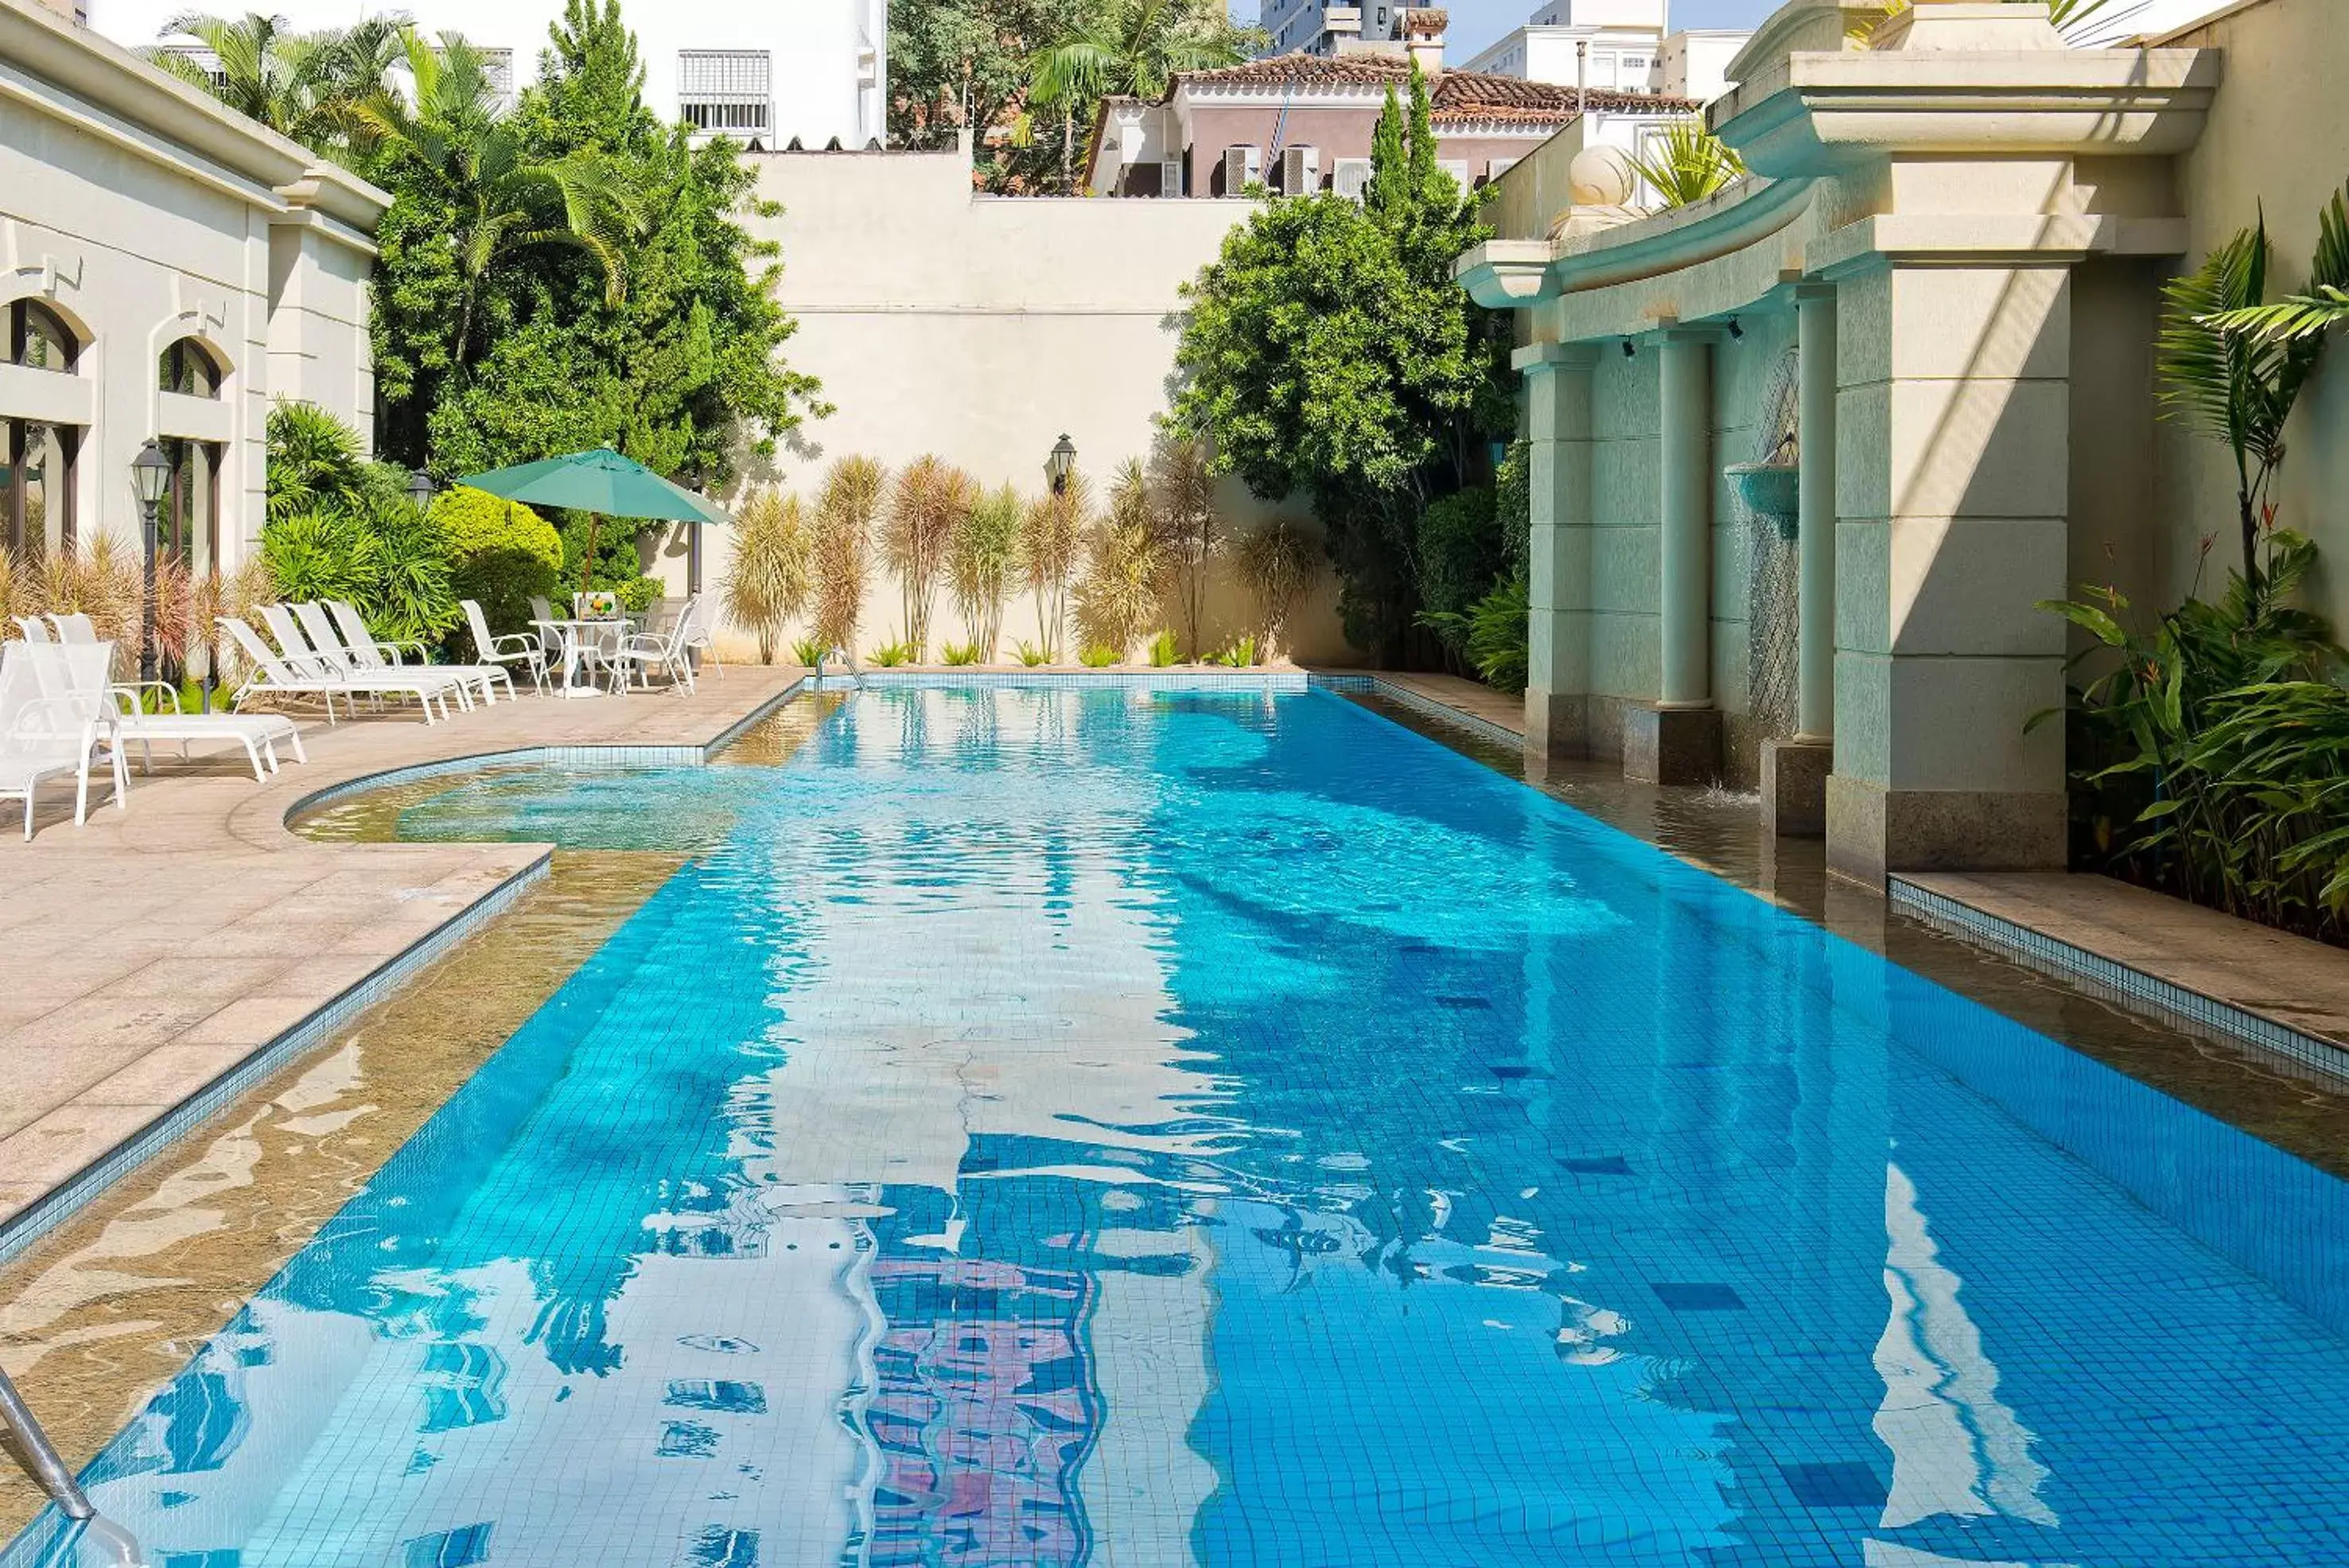 Off site, Swimming Pool in Meliá Campinas